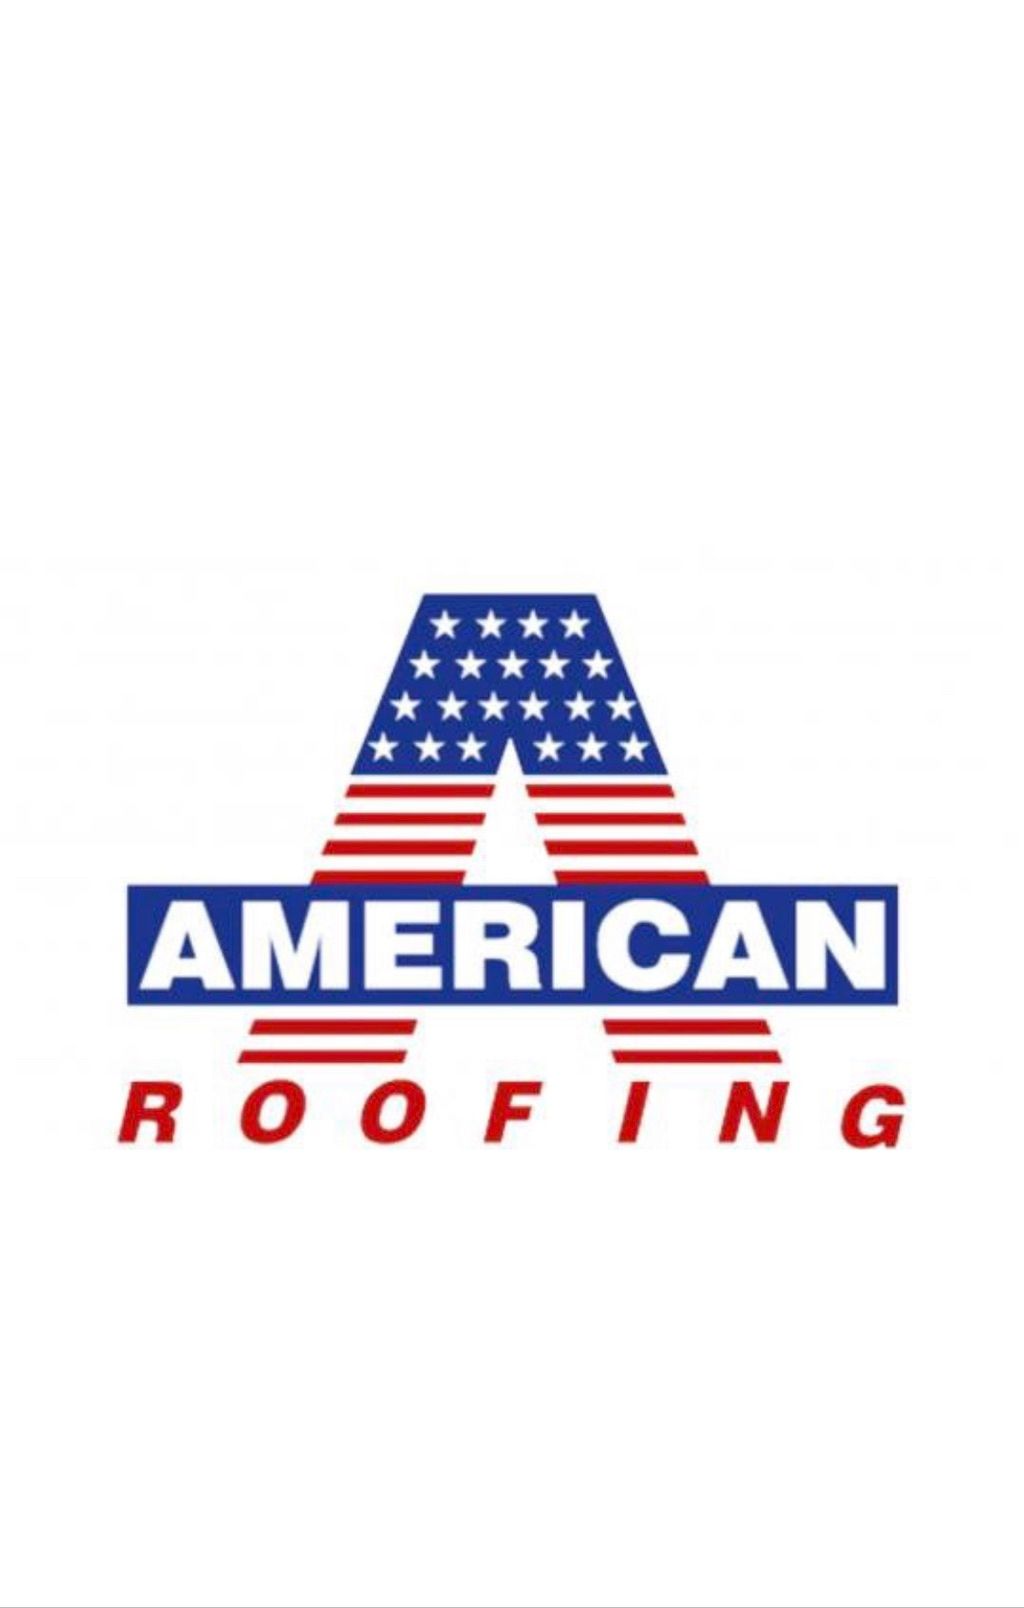 American roofing and contracting